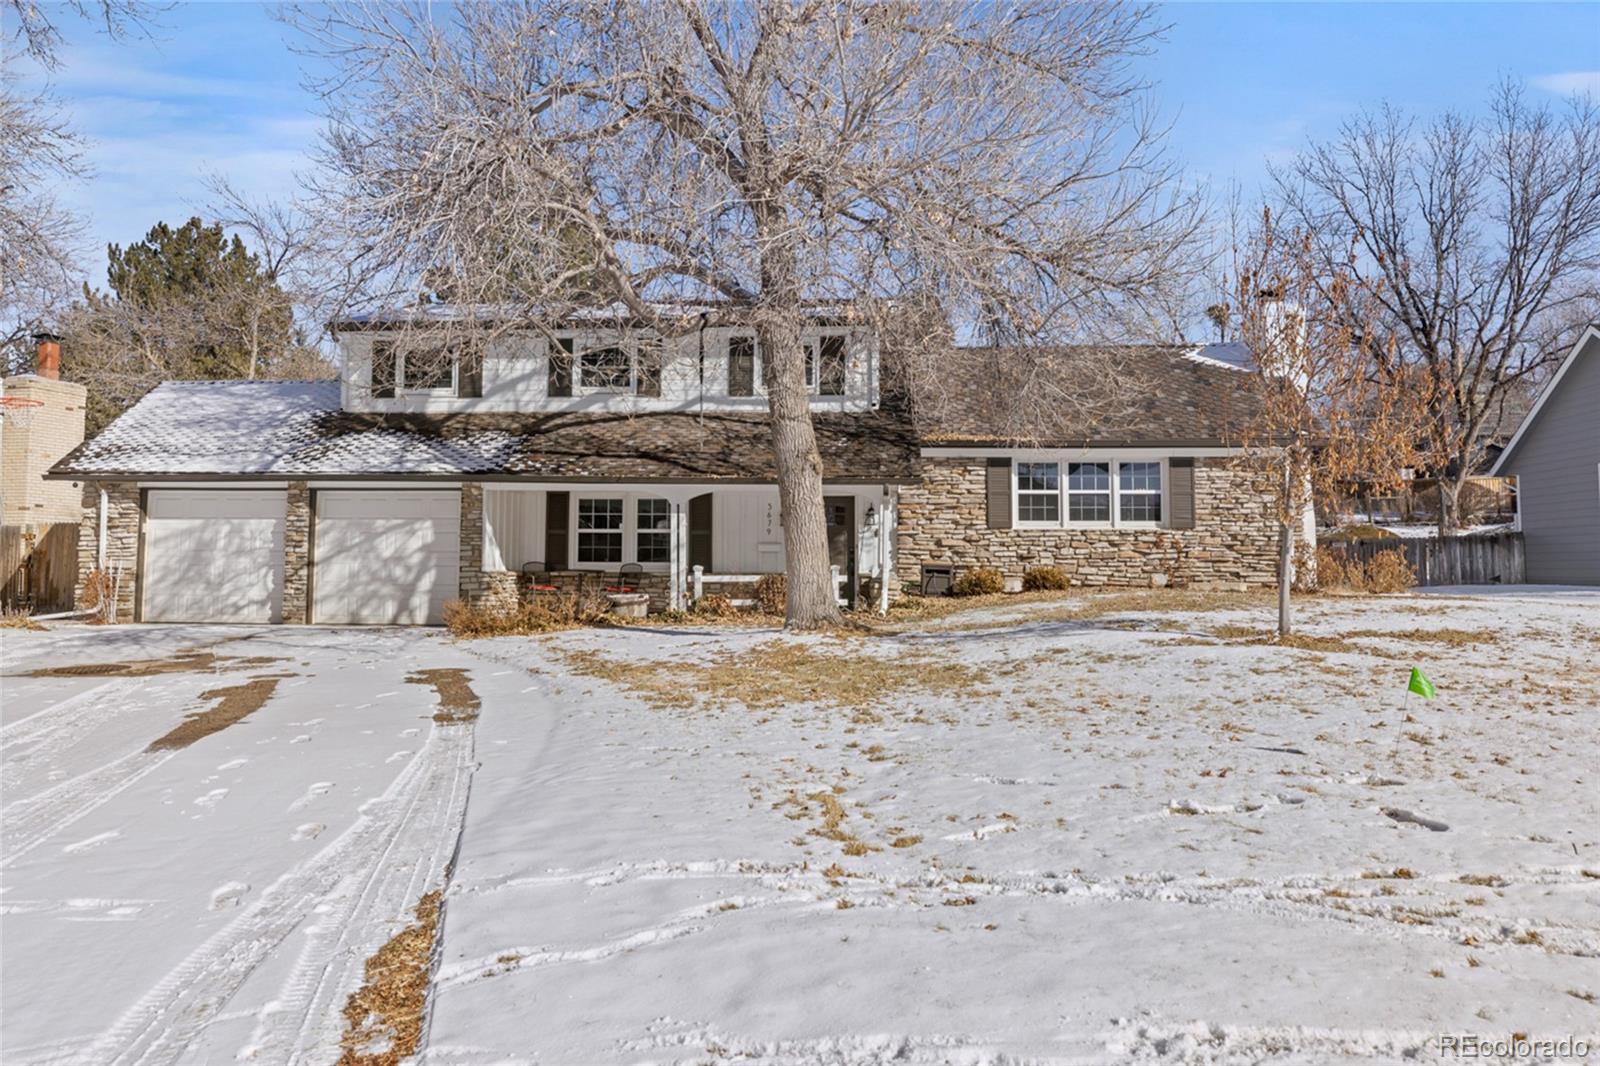 3679 e nobles road, Centennial sold home. Closed on 2024-02-22 for $810,000.